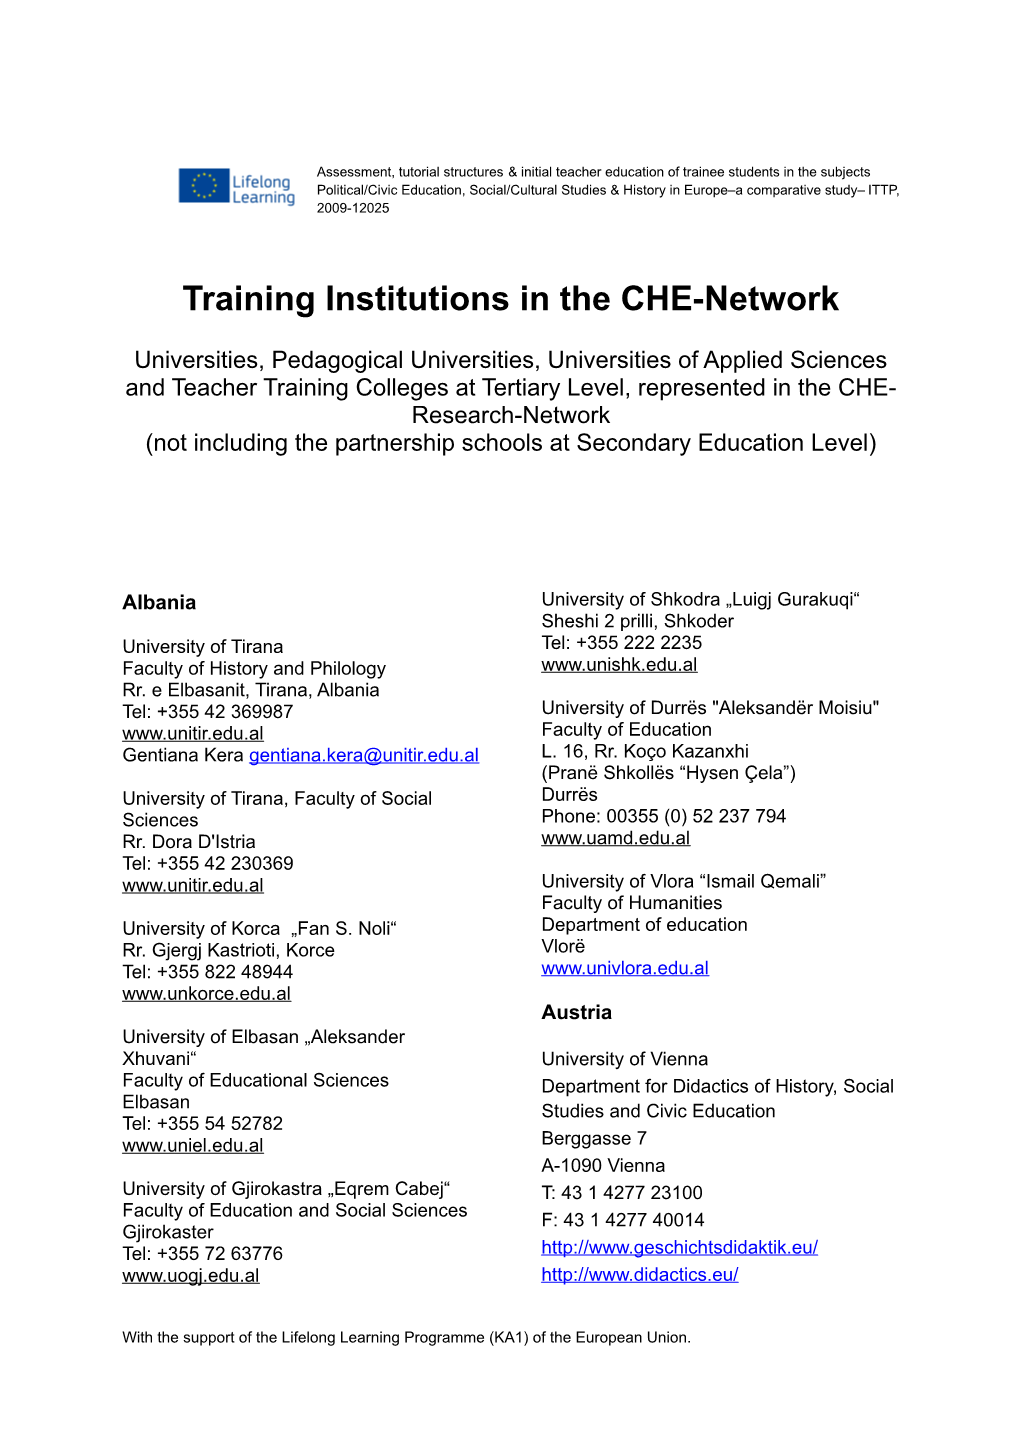 Training Institutions in the CHE-Network